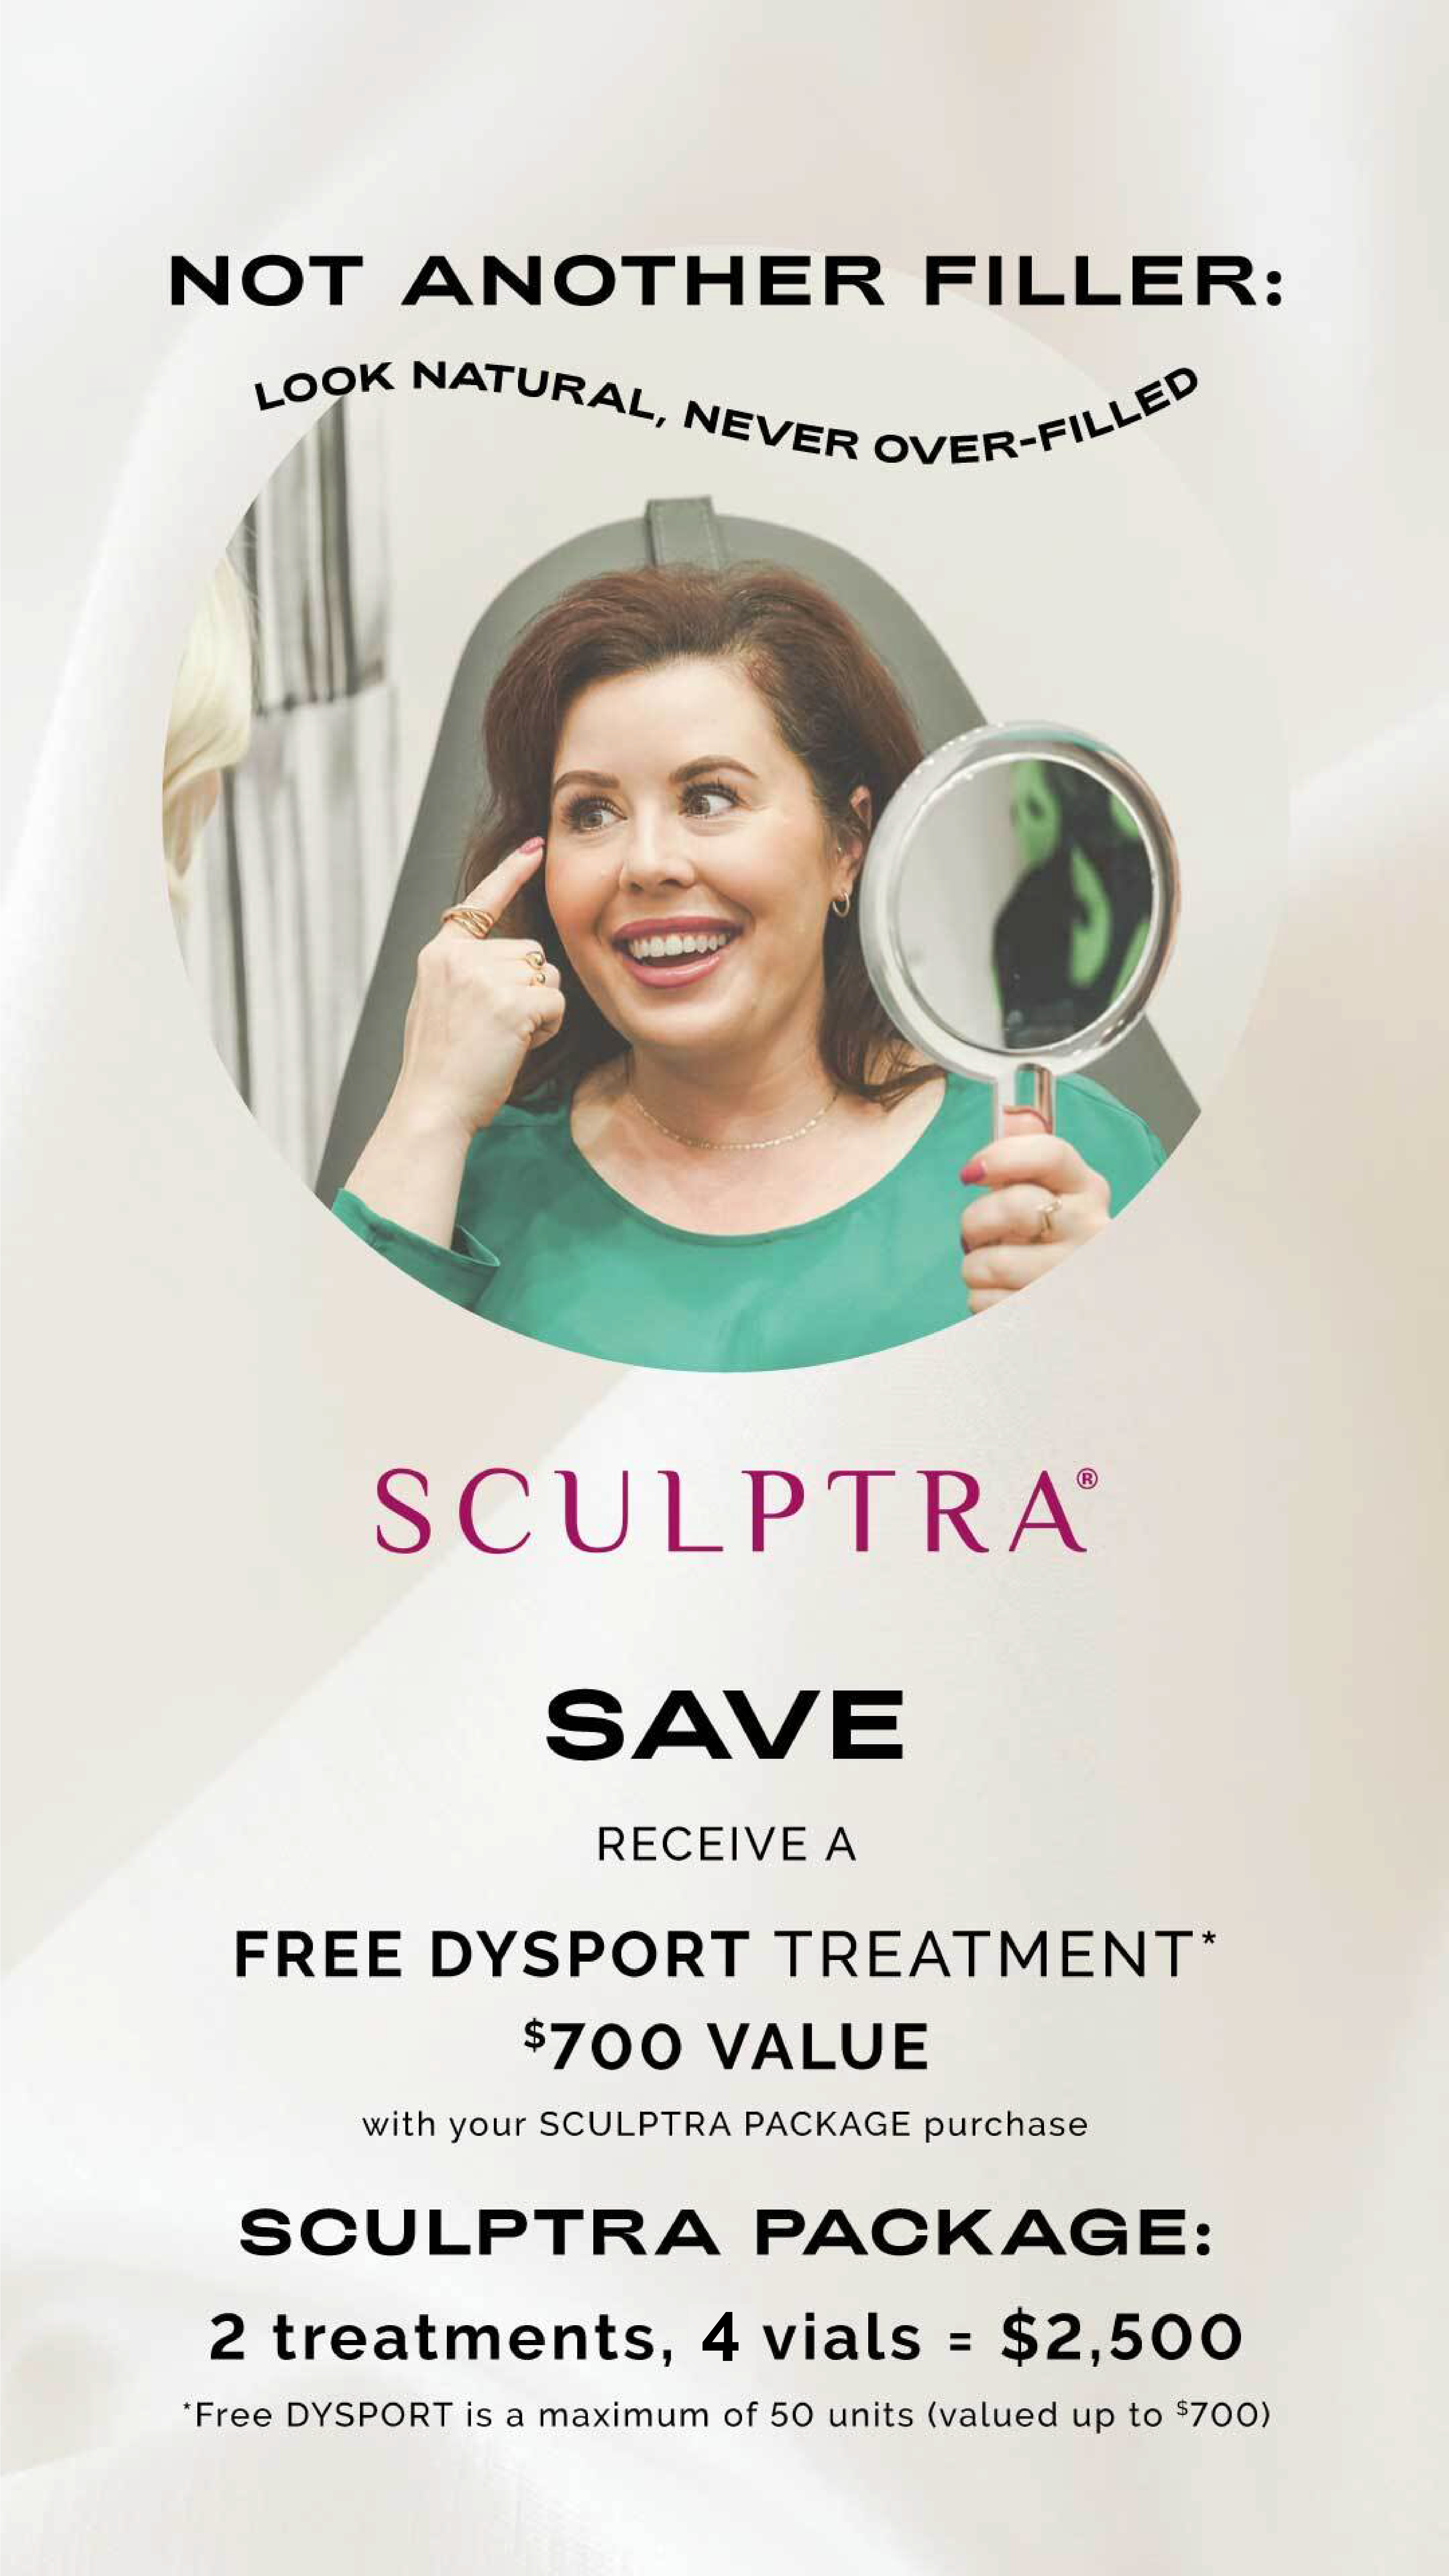 Sculptra promotion in April and May! Purchase a 2 vial sculptra package and receive up to 50 units of Dysport for FREE!